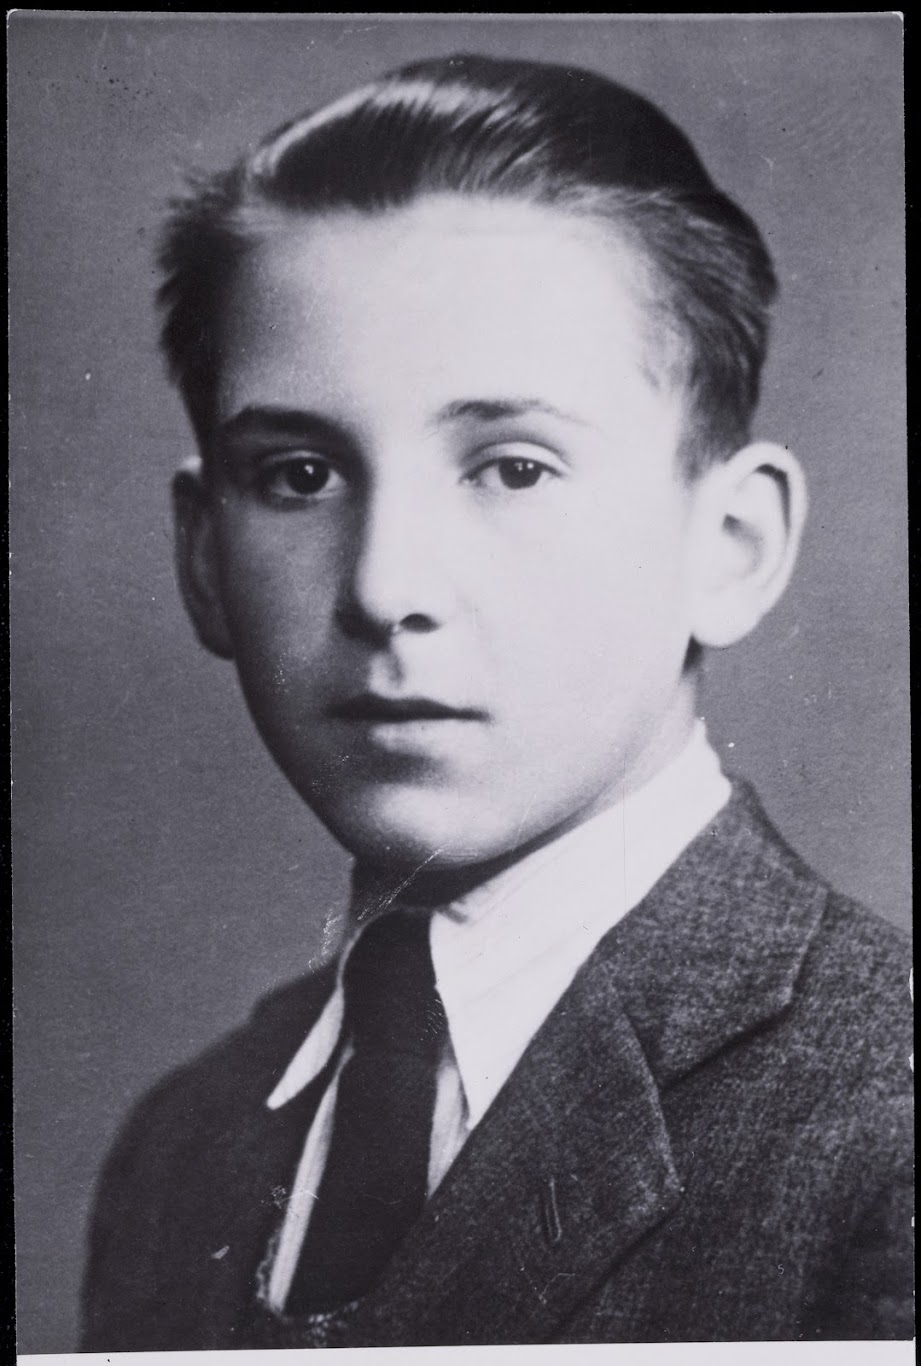 PHOTO: Otto Wolf was a Jewish Czech teenager born in 1927. He chronicled his family's experiences living in hiding in a diary beginning in 1942. Photo courtesy of United States Holocaust Memorial Museum.